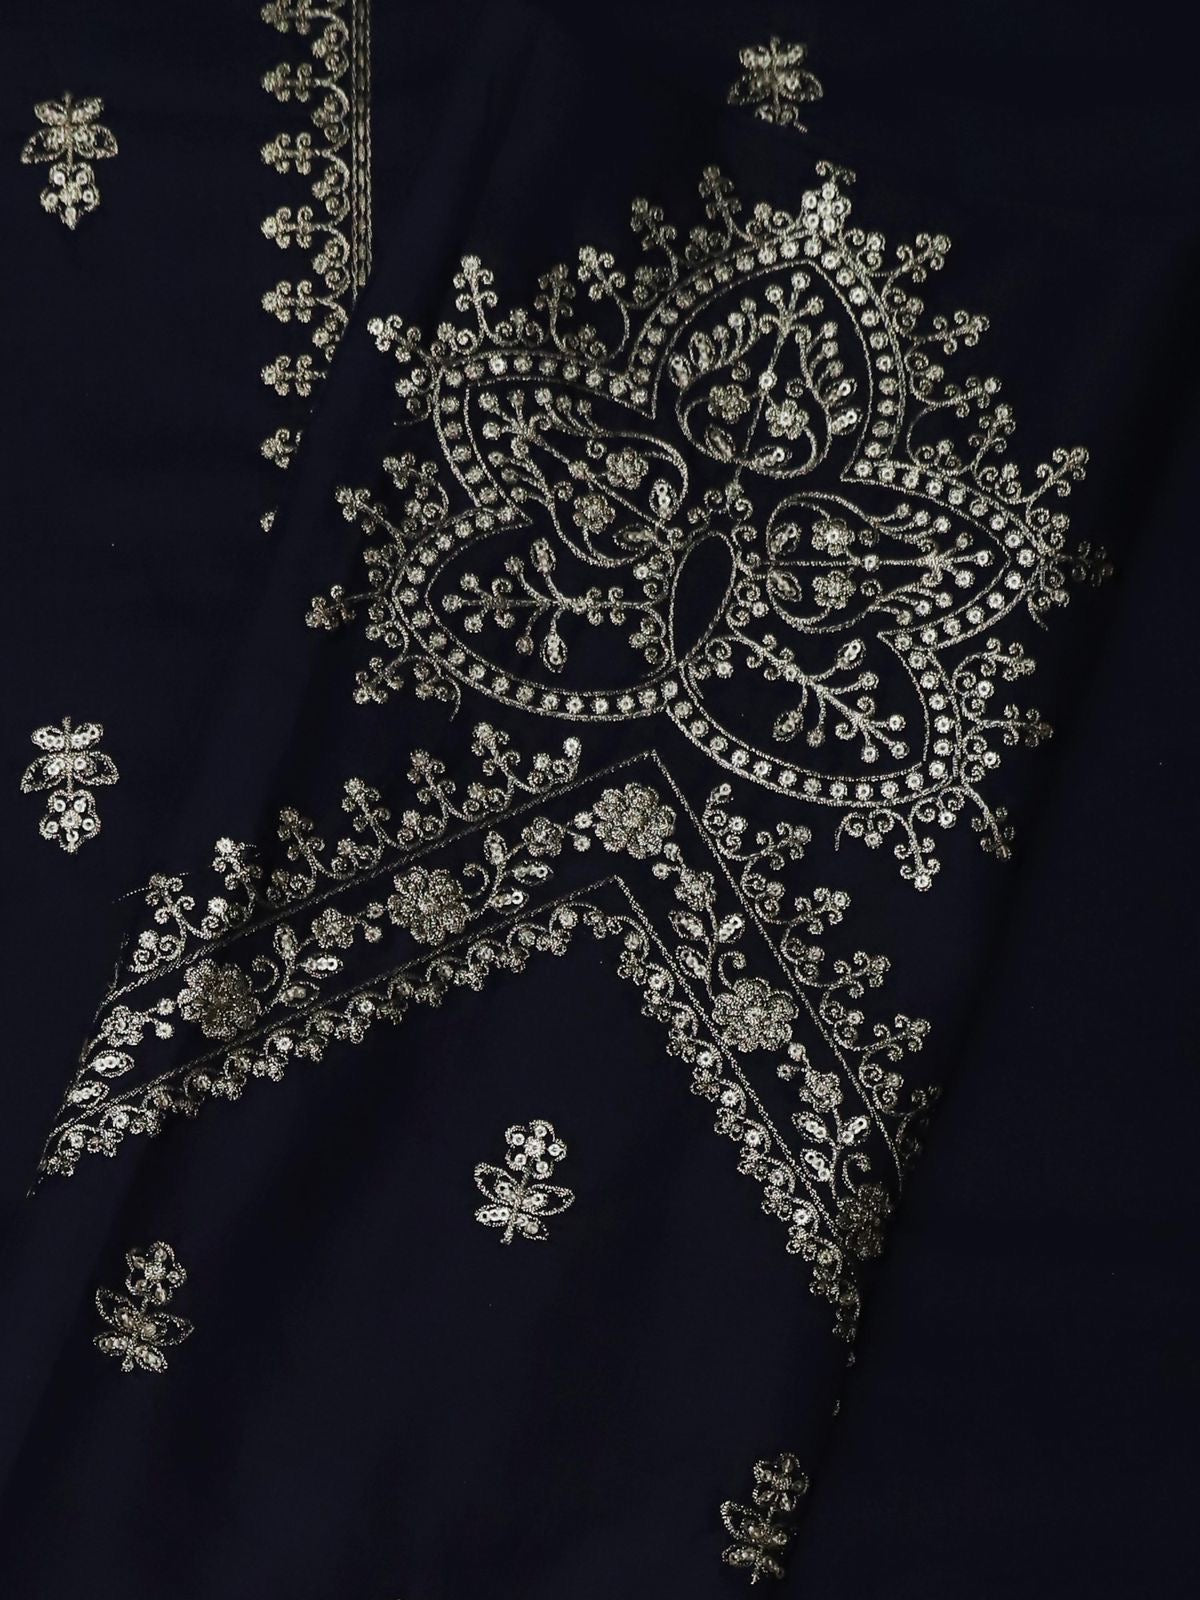 Maria B. Lawn Embroidered